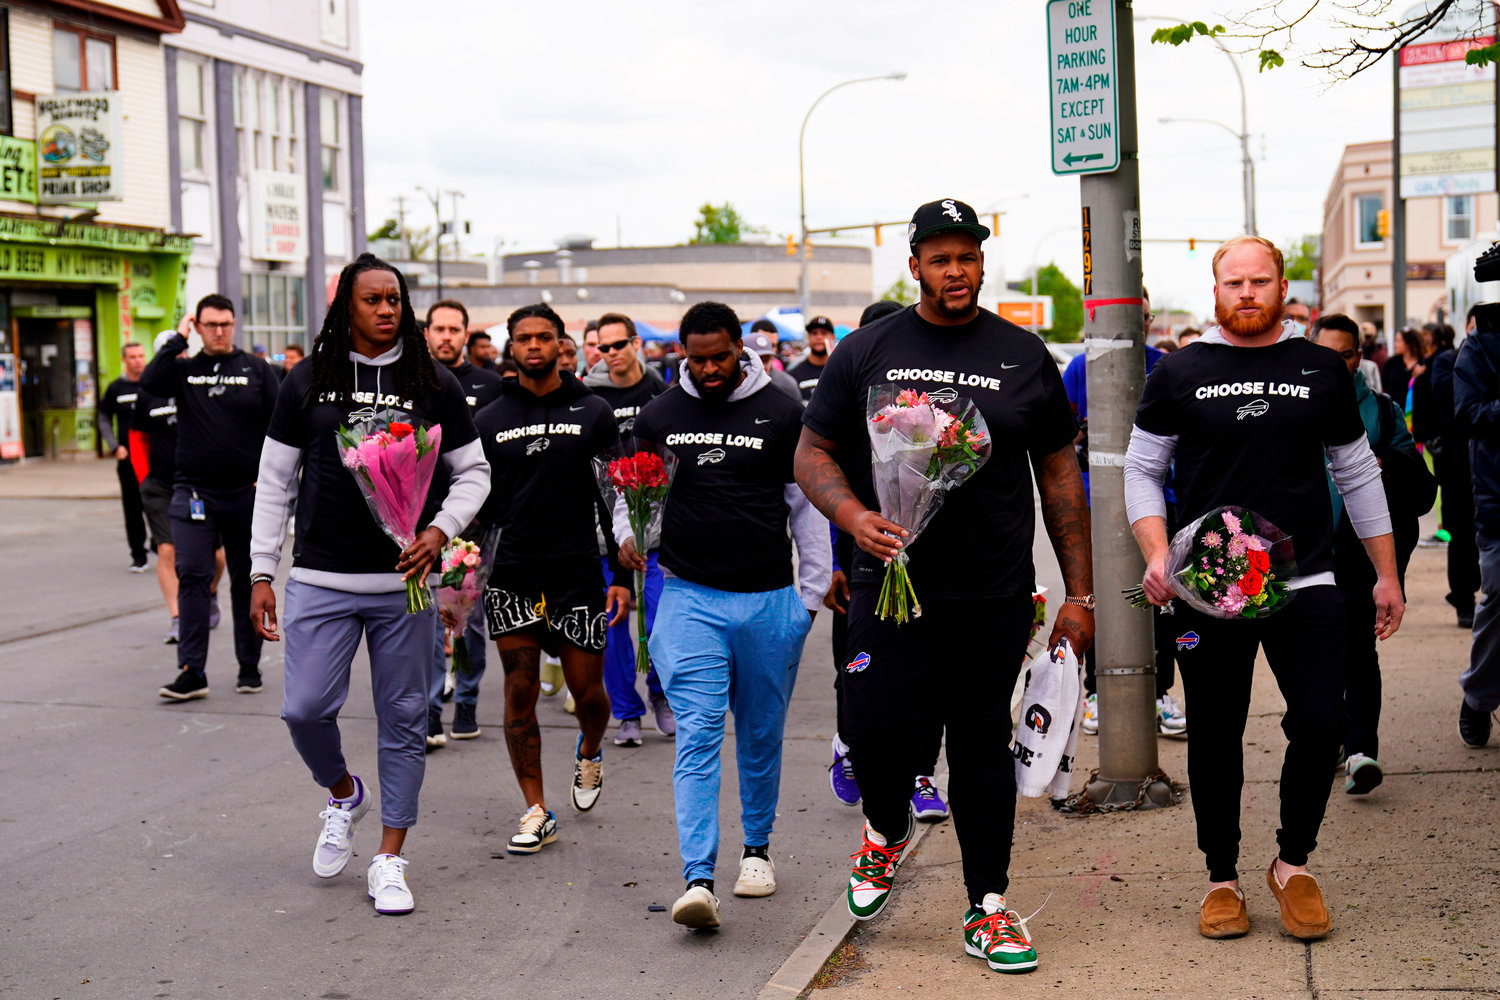 Members of the Buffalo Bills make their way to the scene of Saturday's shooting at a supermarket, in Buffalo, N.Y., Wednesday, May 18, 2022. (AP Photo/Matt Rourke)